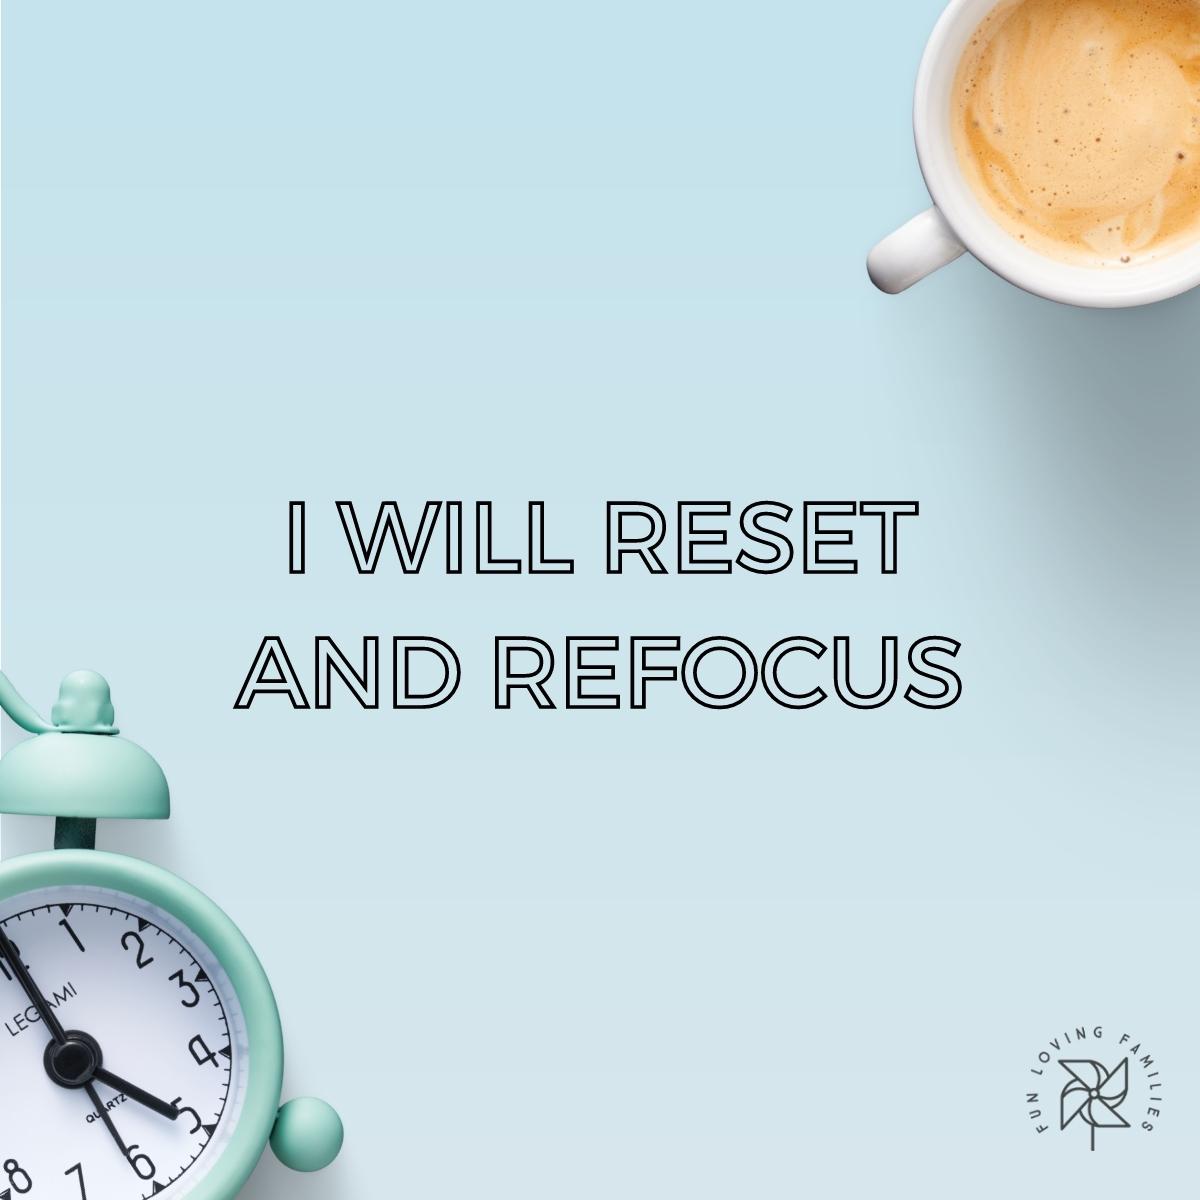 I will reset and refocus affirmation